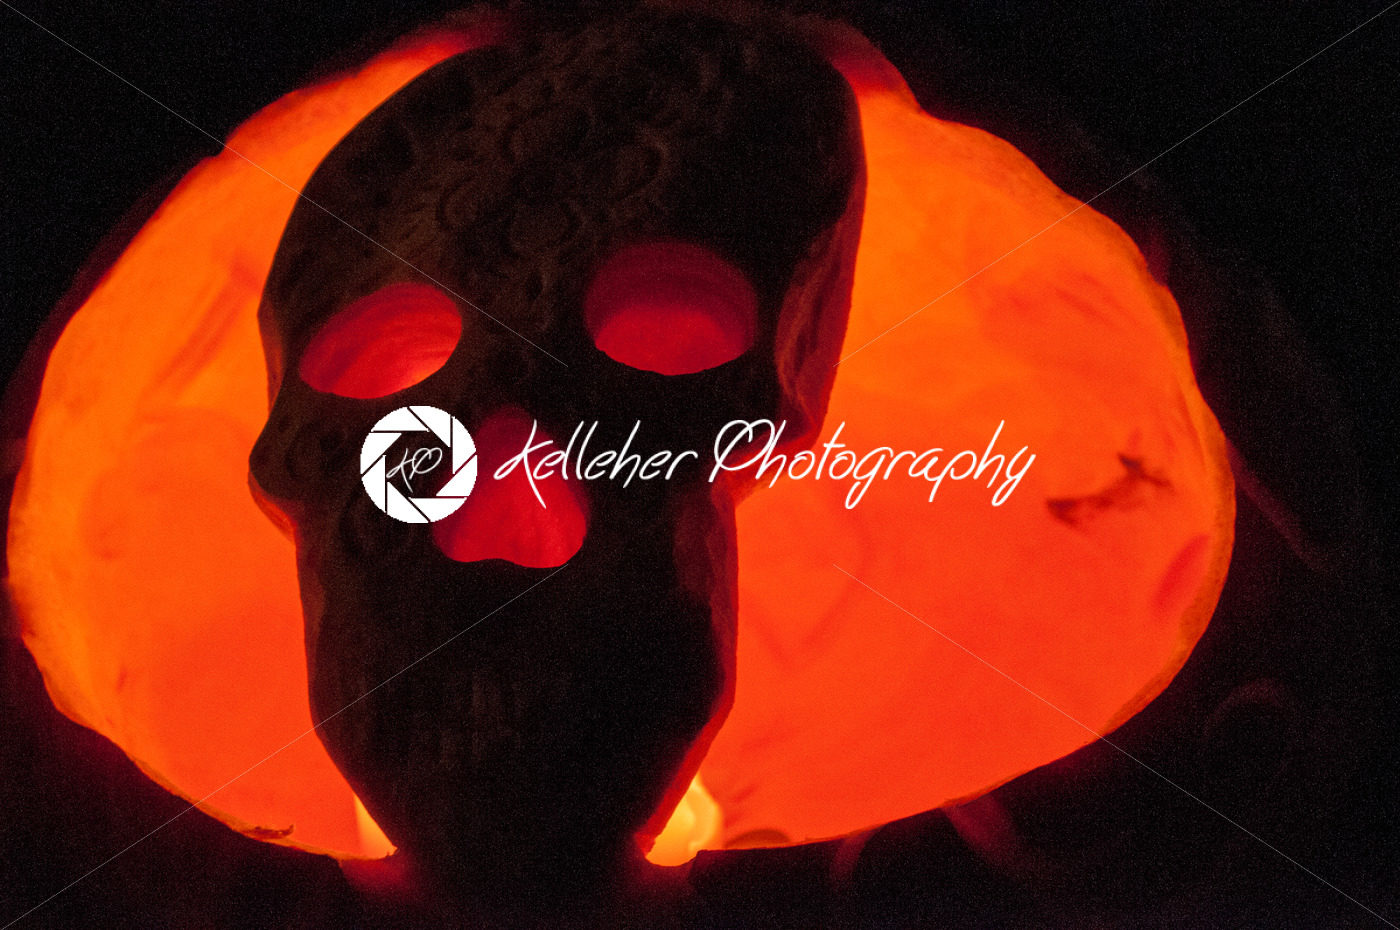 CHADDS FORD, PA – OCTOBER 26: Skull Pumpkin at The Great Pumpkin Carve carving contest on October 26, 2013 - Kelleher Photography Store